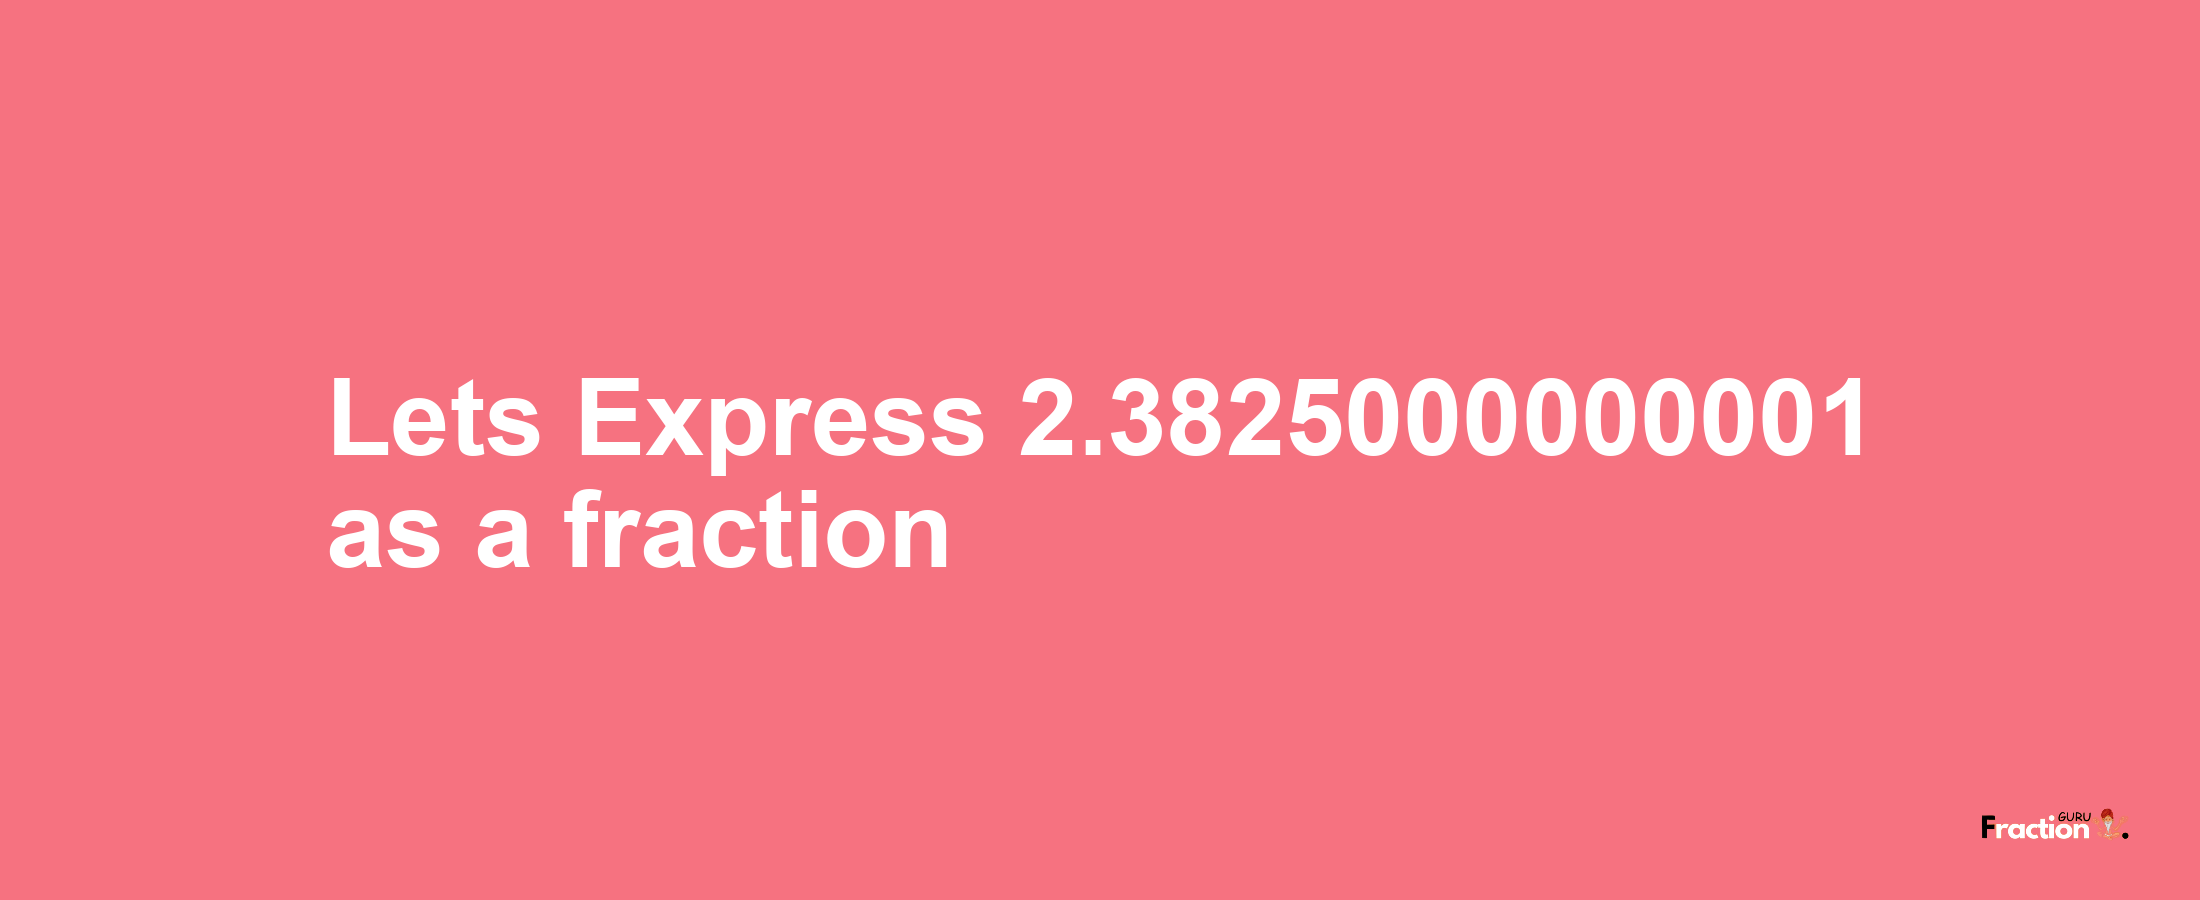 Lets Express 2.3825000000001 as afraction